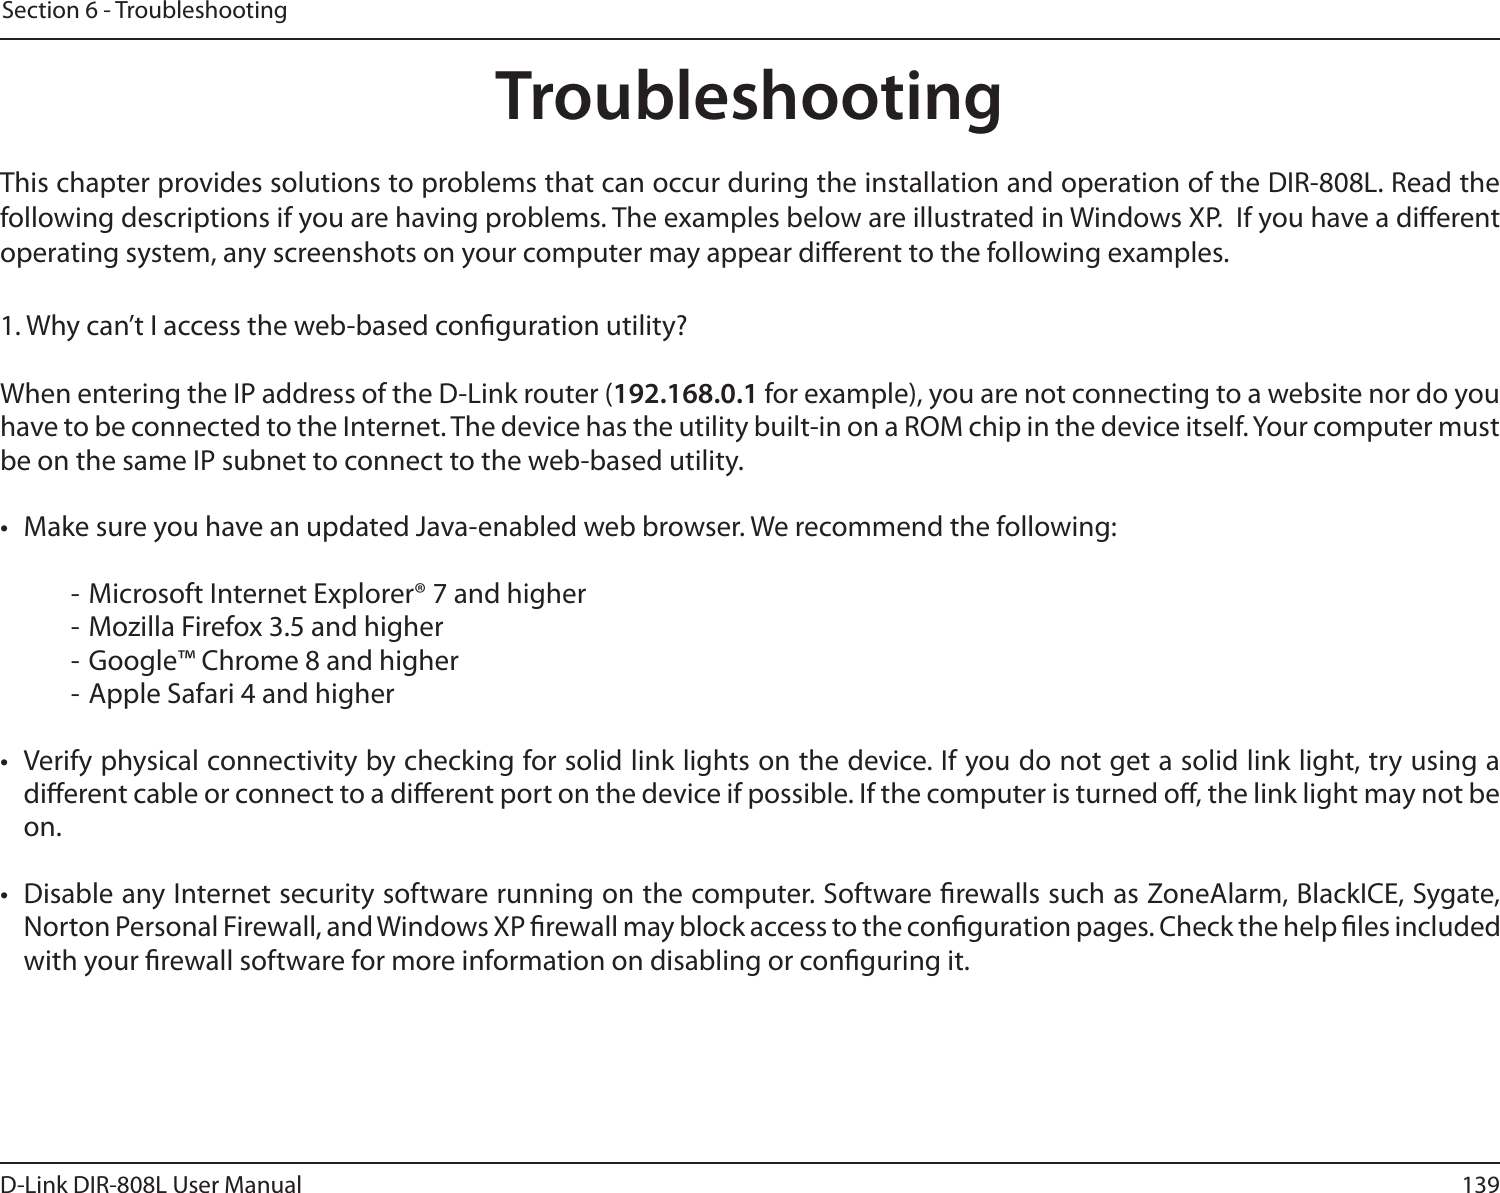 139D-Link DIR-808L User ManualSection 6 - TroubleshootingTroubleshootingThis chapter provides solutions to problems that can occur during the installation and operation of the DIR-808L. Read the following descriptions if you are having problems. The examples below are illustrated in Windows XP.  If you have a dierent operating system, any screenshots on your computer may appear dierent to the following examples.1. Why can’t I access the web-based conguration utility?When entering the IP address of the D-Link router (192.168.0.1 for example), you are not connecting to a website nor do you have to be connected to the Internet. The device has the utility built-in on a ROM chip in the device itself. Your computer must be on the same IP subnet to connect to the web-based utility. •  Make sure you have an updated Java-enabled web browser. We recommend the following:  - Microsoft Internet Explorer® 7 and higher- Mozilla Firefox 3.5 and higher- Google™ Chrome 8 and higher- Apple Safari 4 and higher•  Verify physical connectivity by checking for solid link lights on the device. If you do not get a solid link light, try using a dierent cable or connect to a dierent port on the device if possible. If the computer is turned o, the link light may not be on.•  Disable any Internet security software running on the computer. Software rewalls such as ZoneAlarm, BlackICE, Sygate, Norton Personal Firewall, and Windows XP rewall may block access to the conguration pages. Check the help les included with your rewall software for more information on disabling or conguring it.